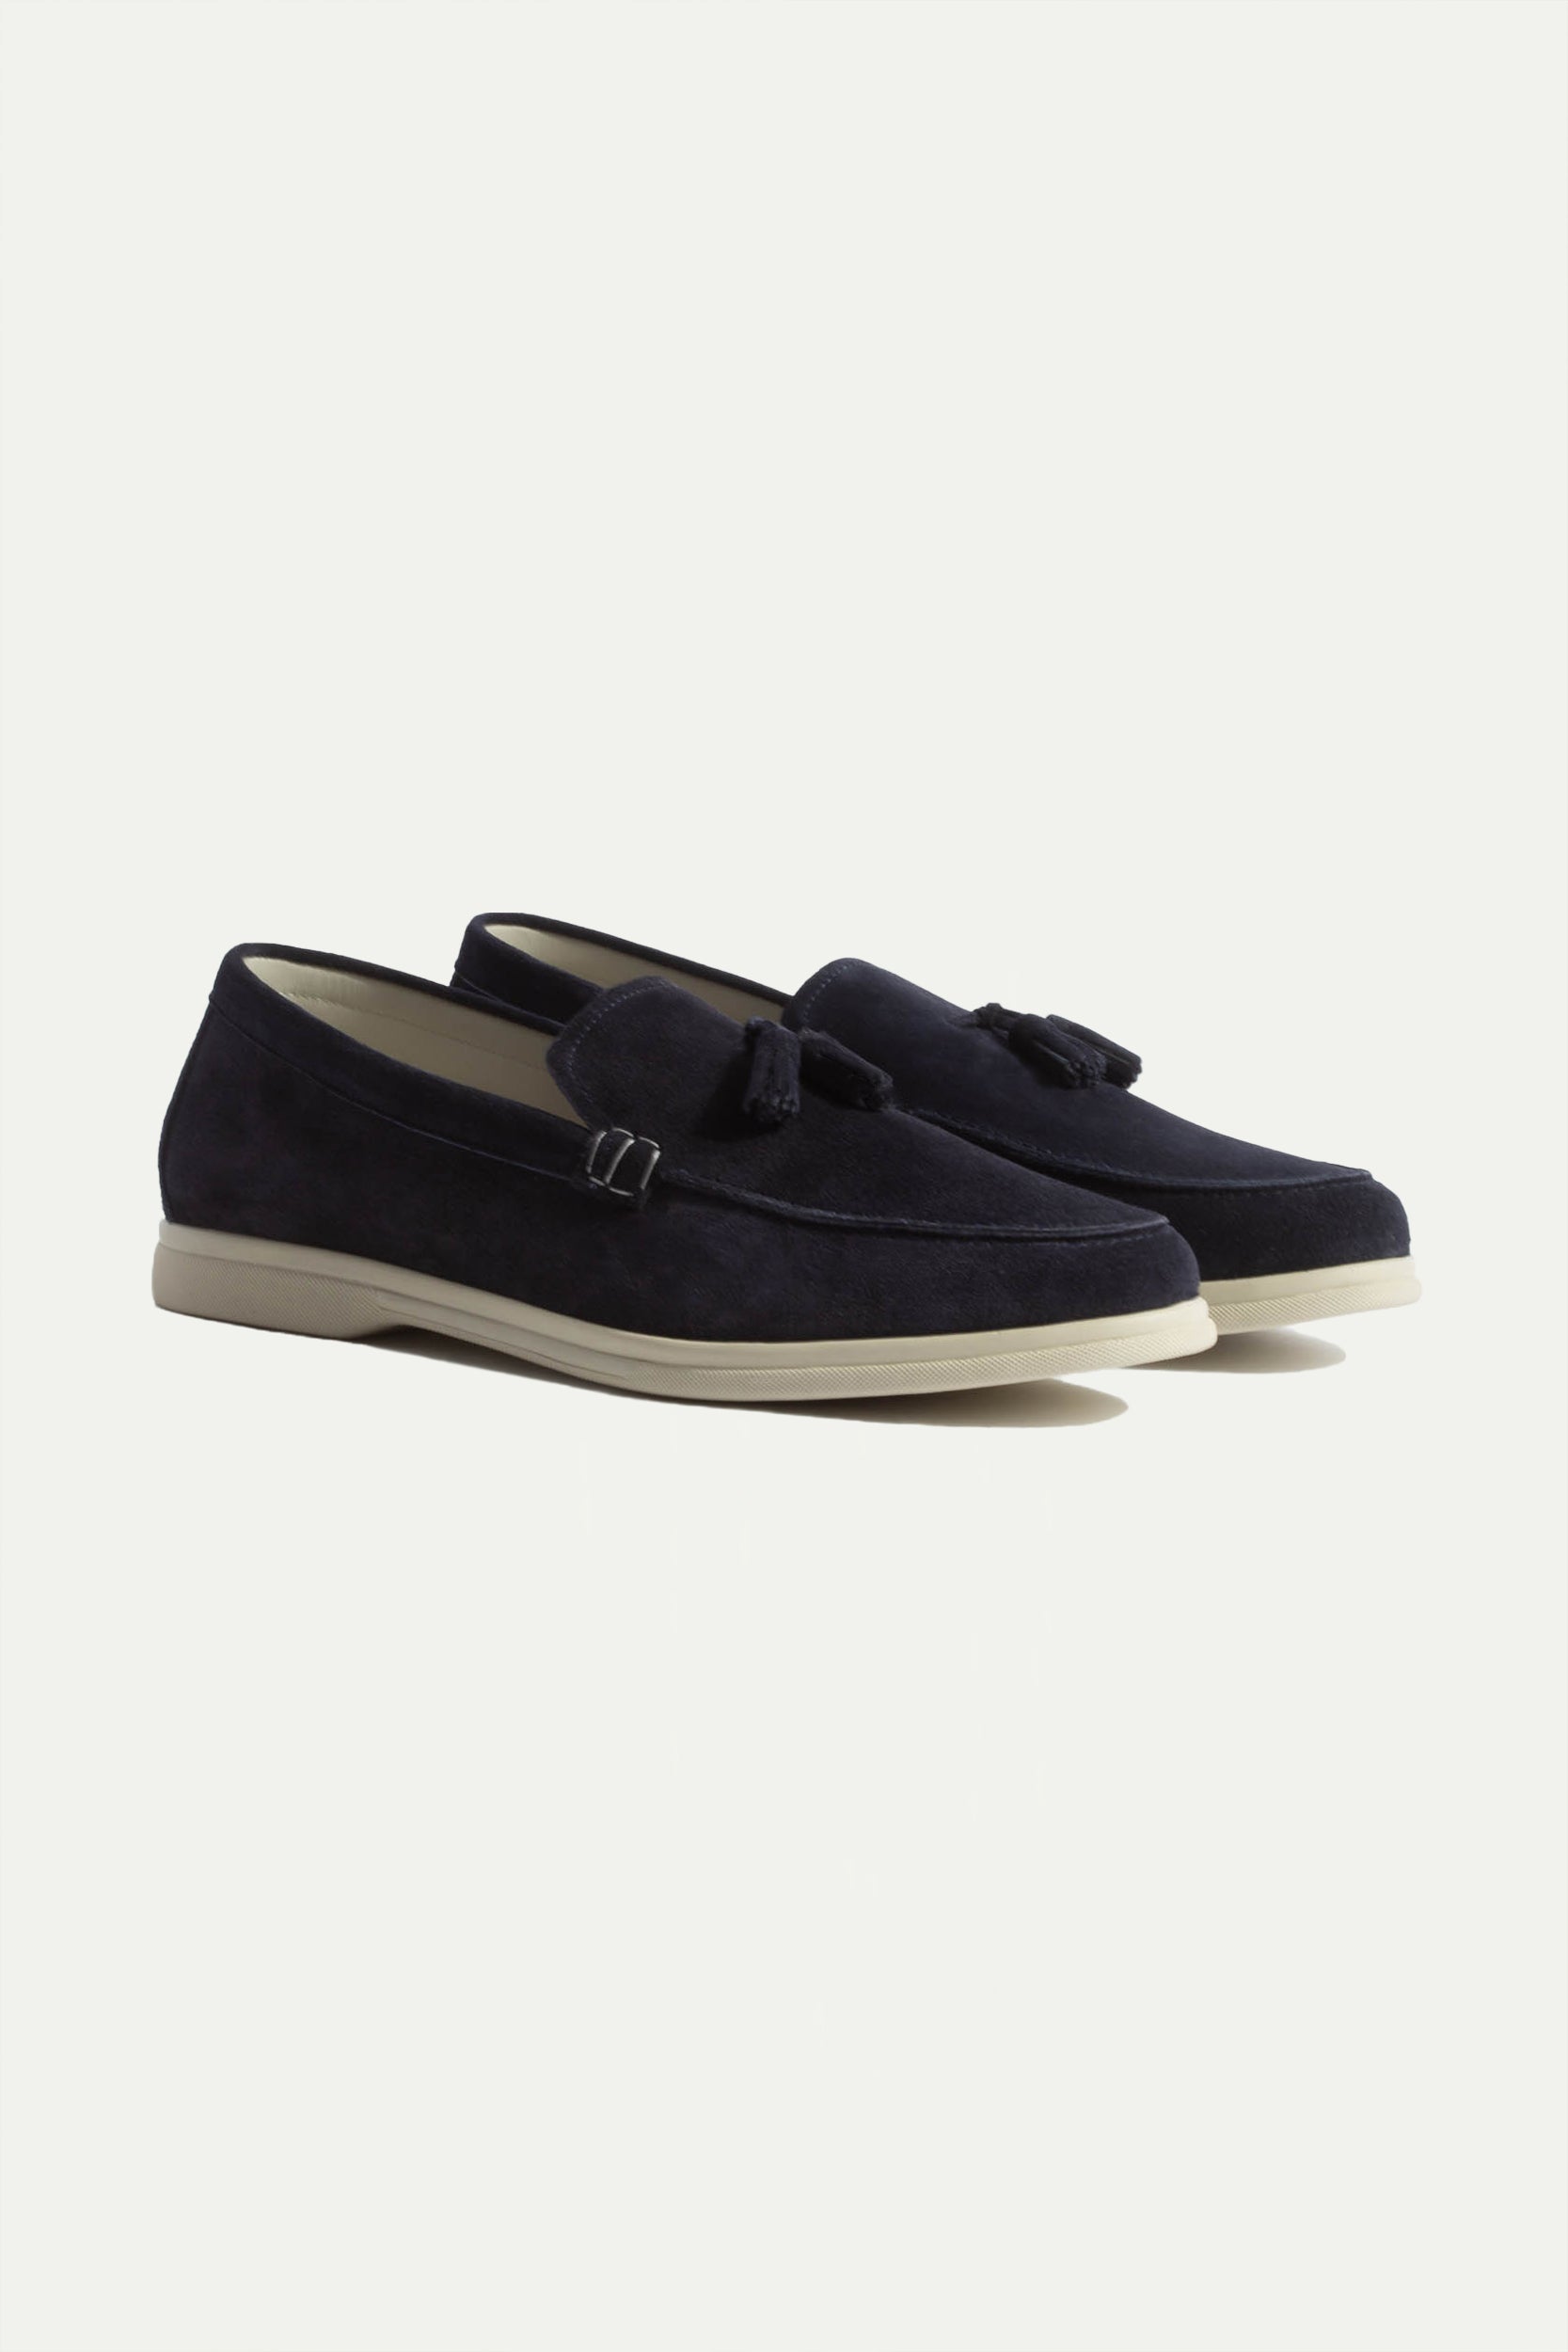 Blue suede tassel loafers - Made In Italy